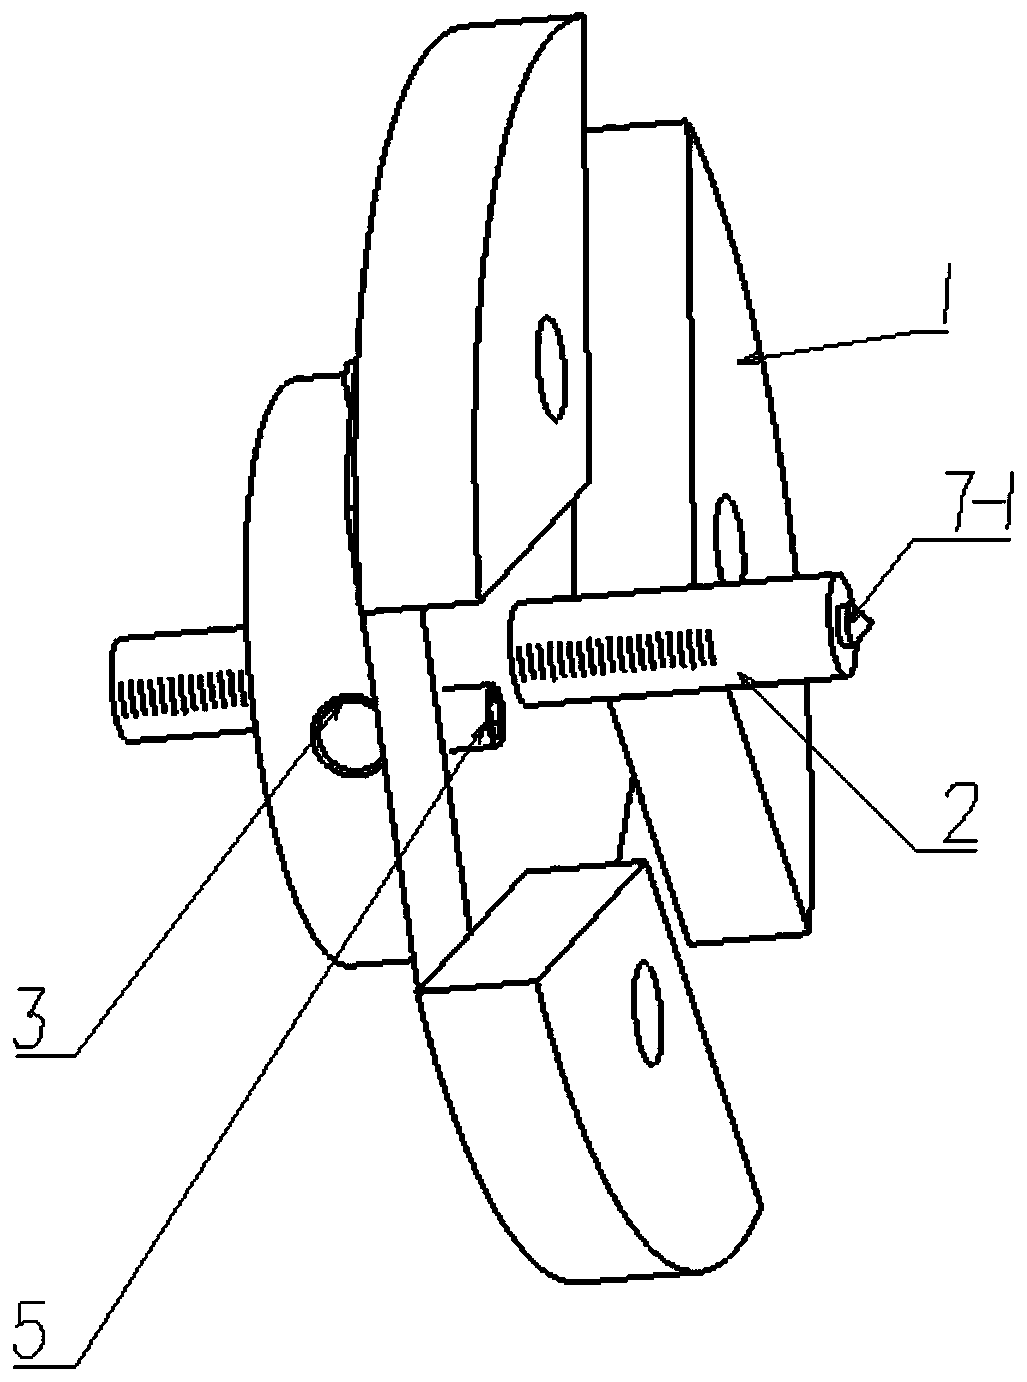 Adjustable axial positioning device of lathe